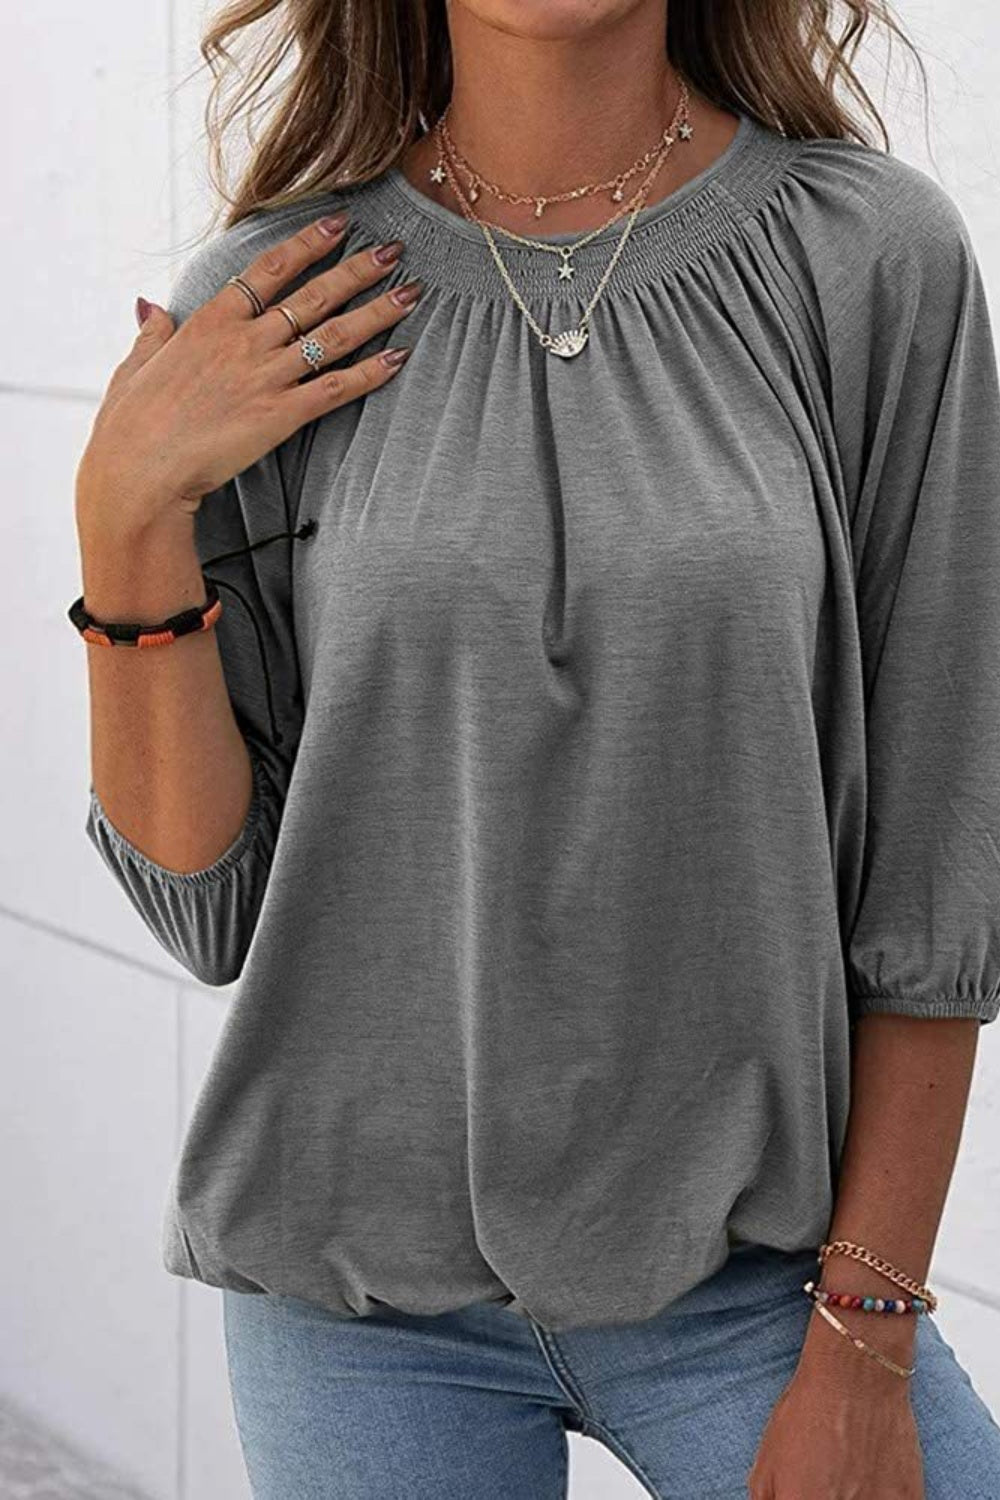 Gathered Detail Round Neck Top (8 Colors)  Krazy Heart Designs Boutique Heather Gray S 